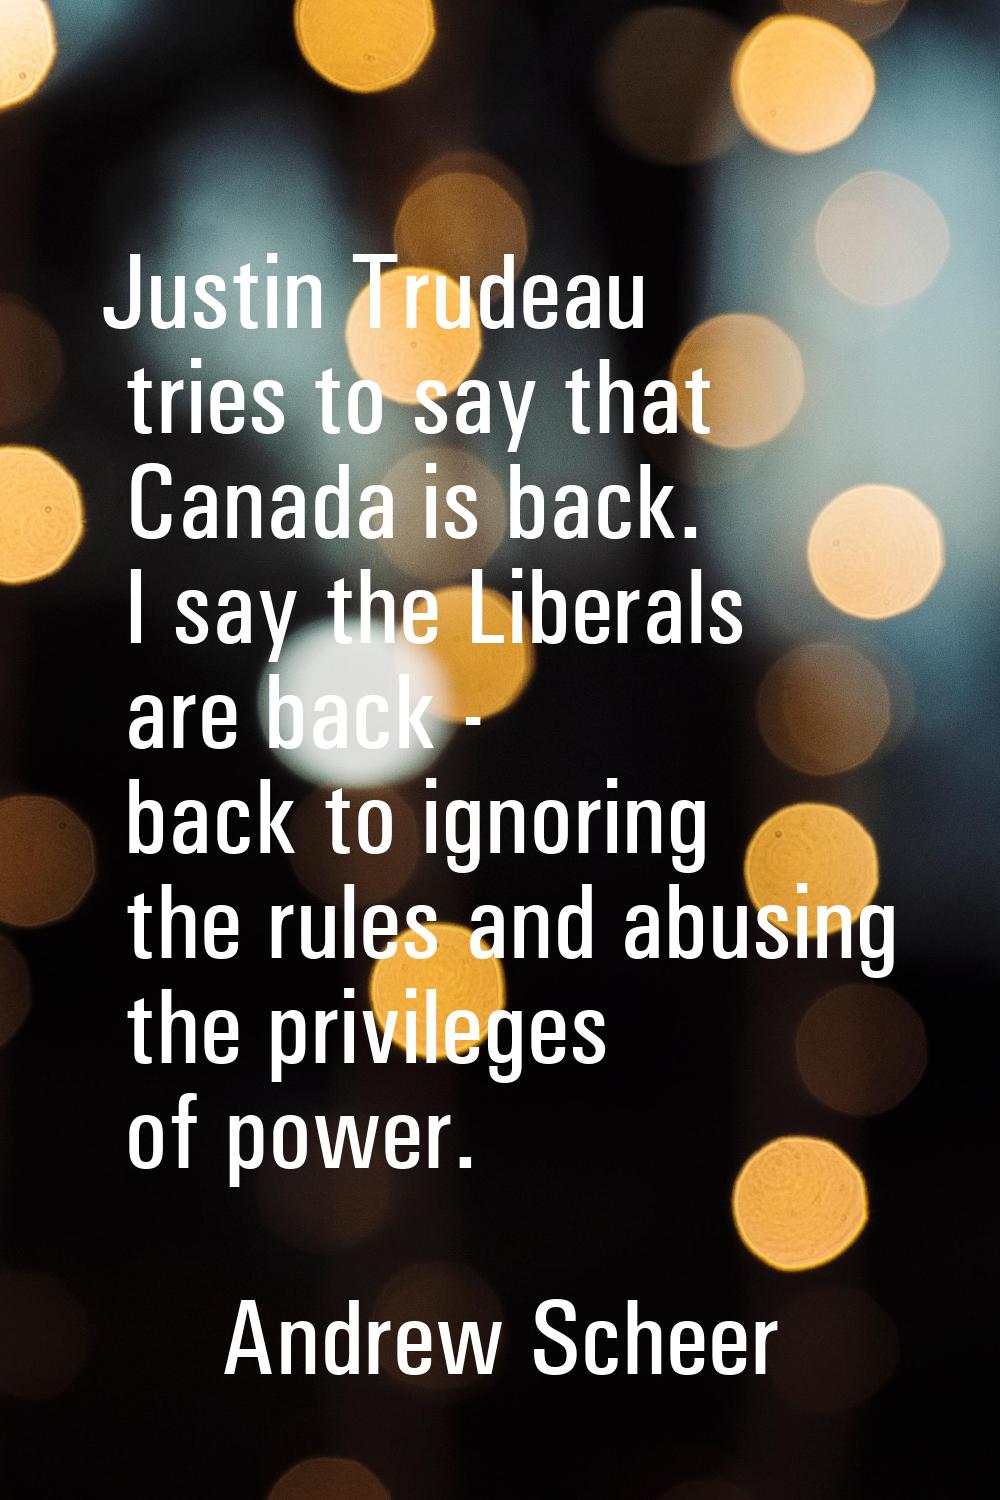 Justin Trudeau tries to say that Canada is back. I say the Liberals are back - back to ignoring the